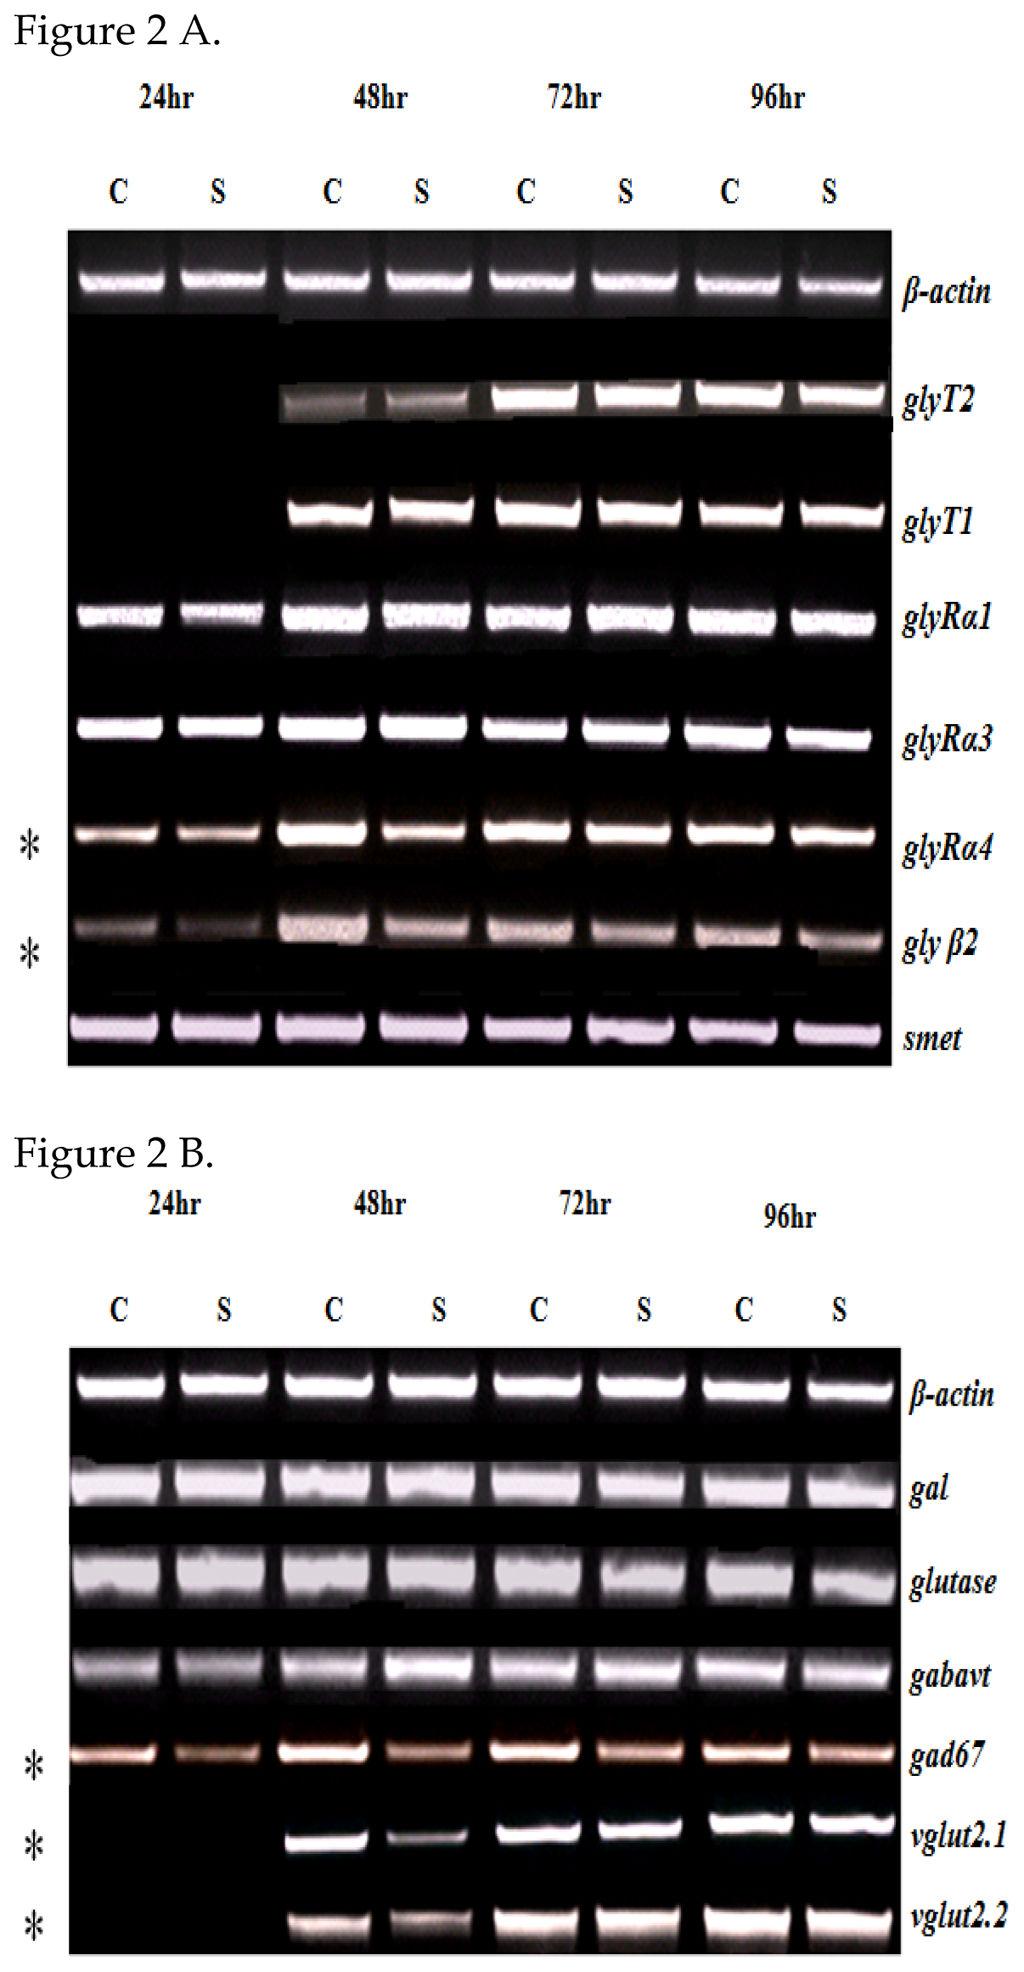 Roy et al. Page 10 Figure 2. (A). PCR results analyzed on 1% agarose gel of glycinergic genes demonstrating downregulation in glyra4 and glyβ2 at 24 and 48hrs.